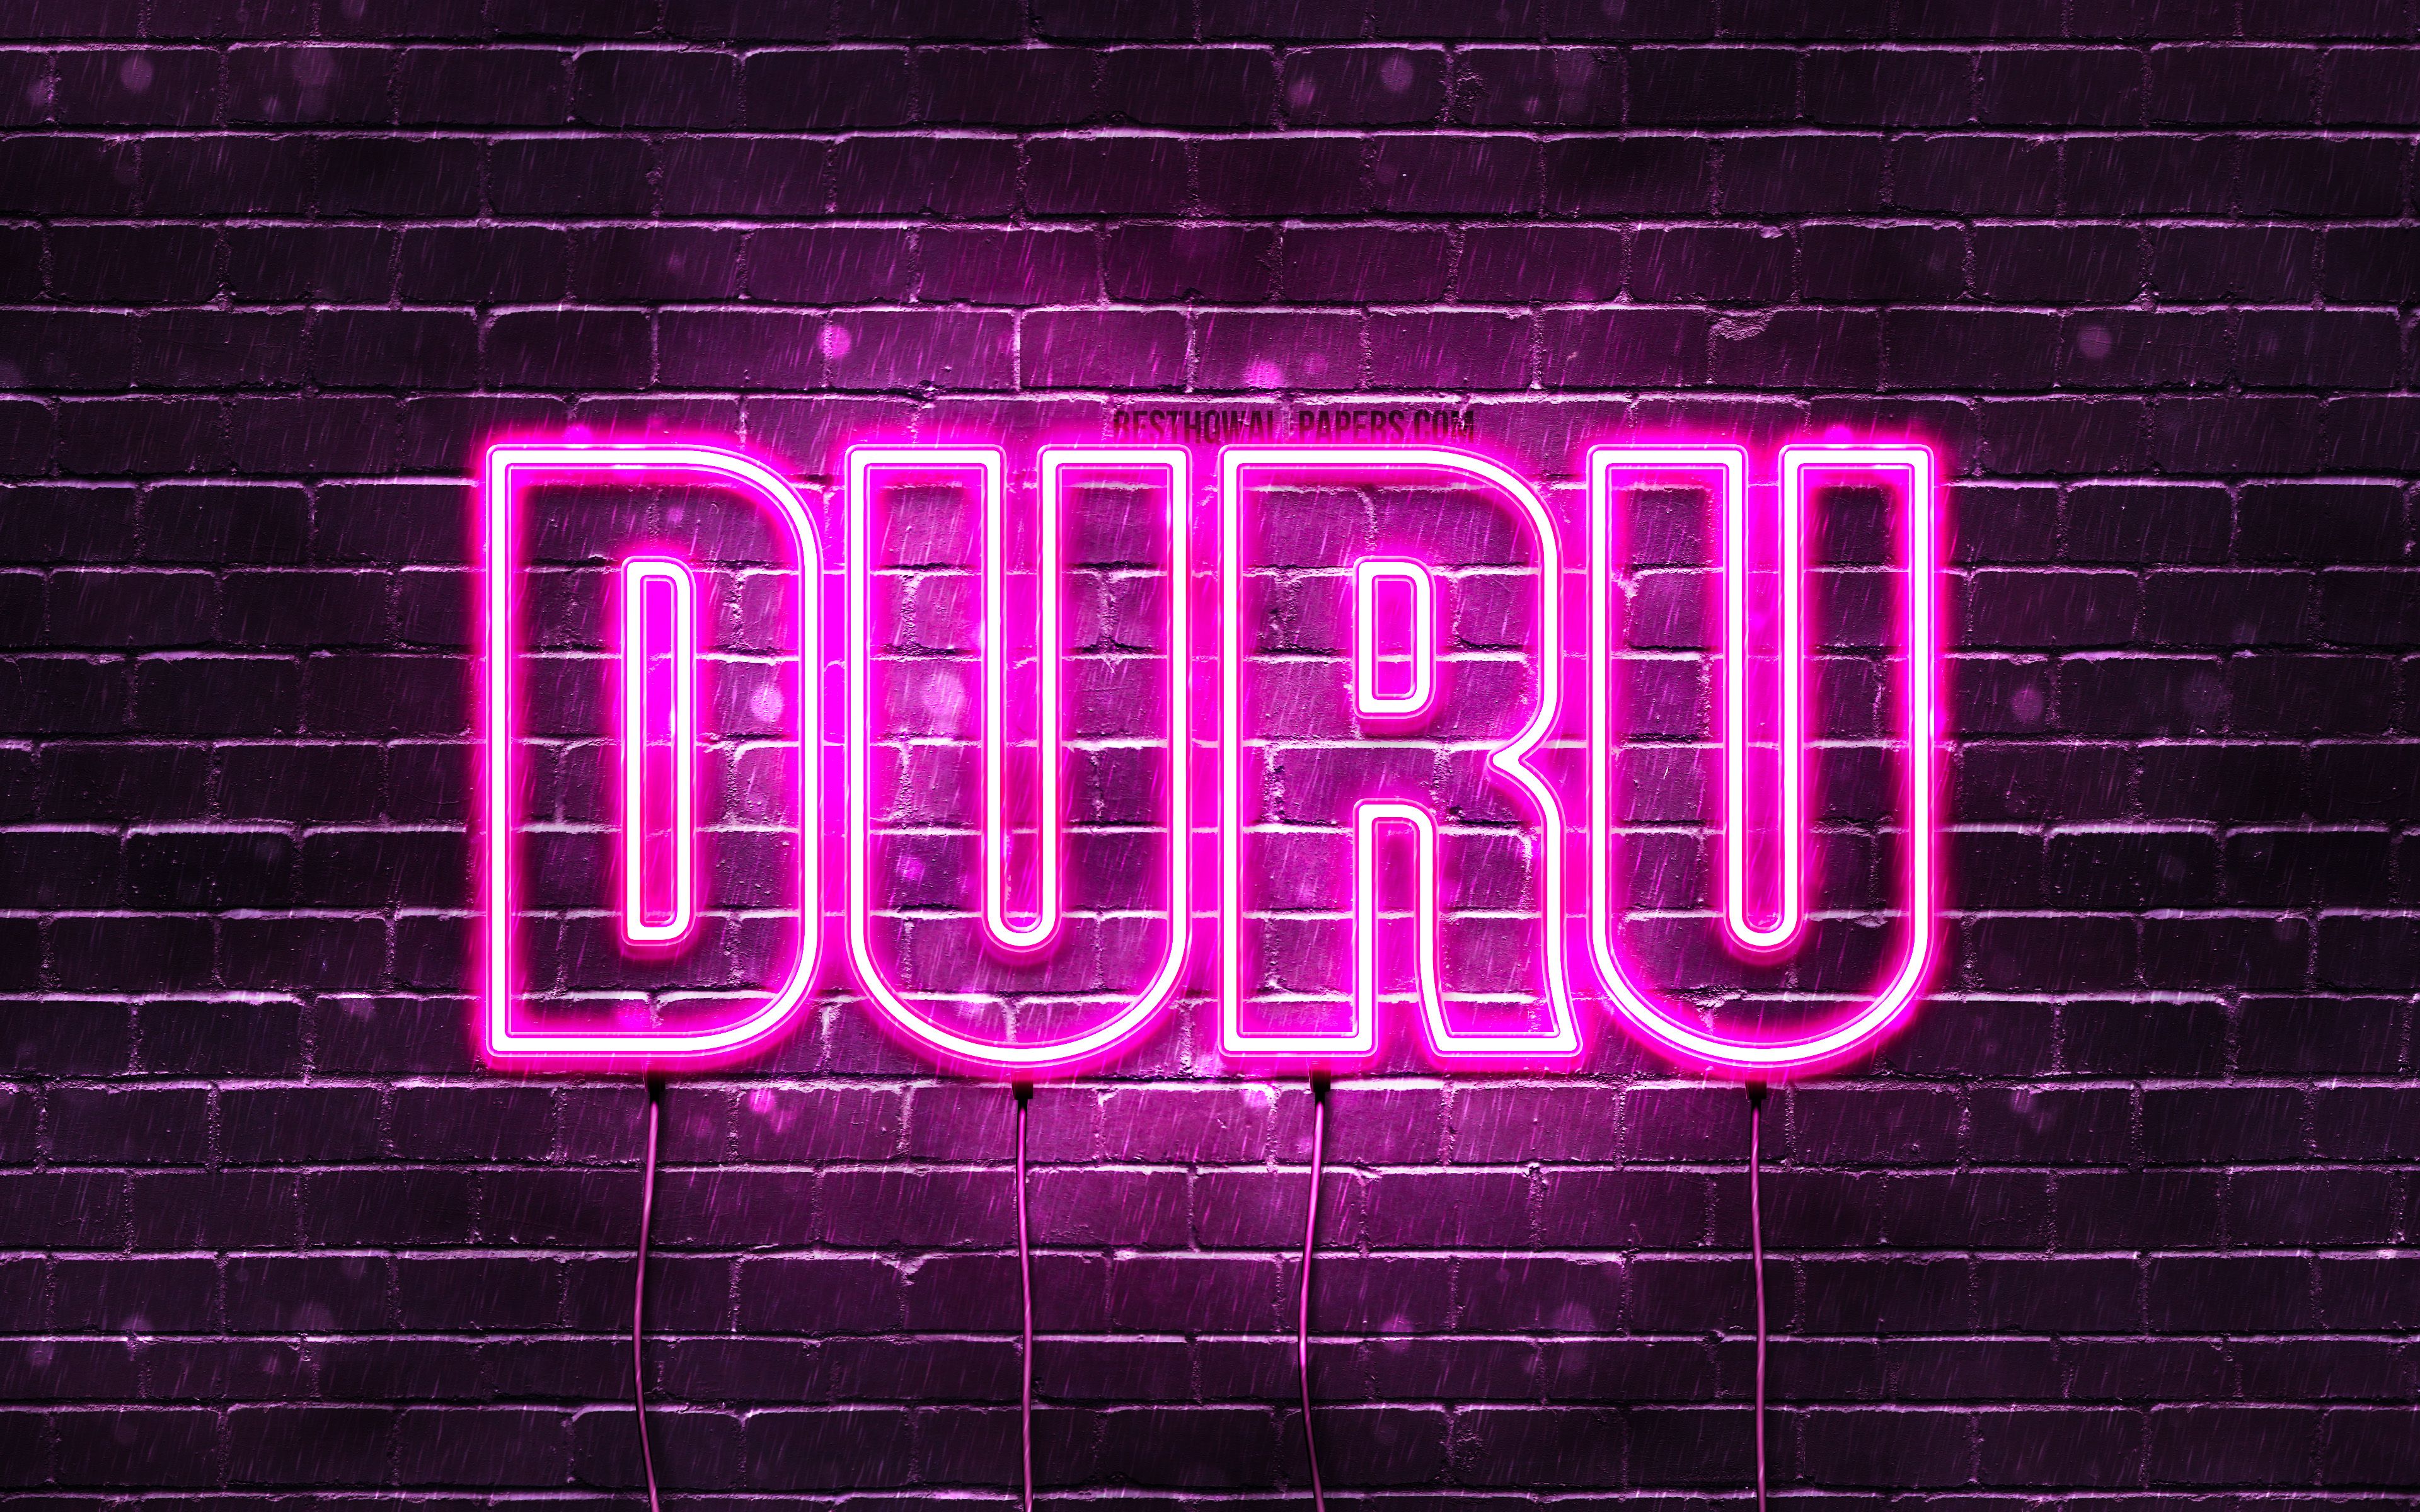 Download wallpaper Duru, 4k, wallpaper with names, female names, Duru name, purple neon lights, Happy Birthday Duru, popular turkish female names, picture with Duru name for desktop with resolution 3840x2400. High Quality